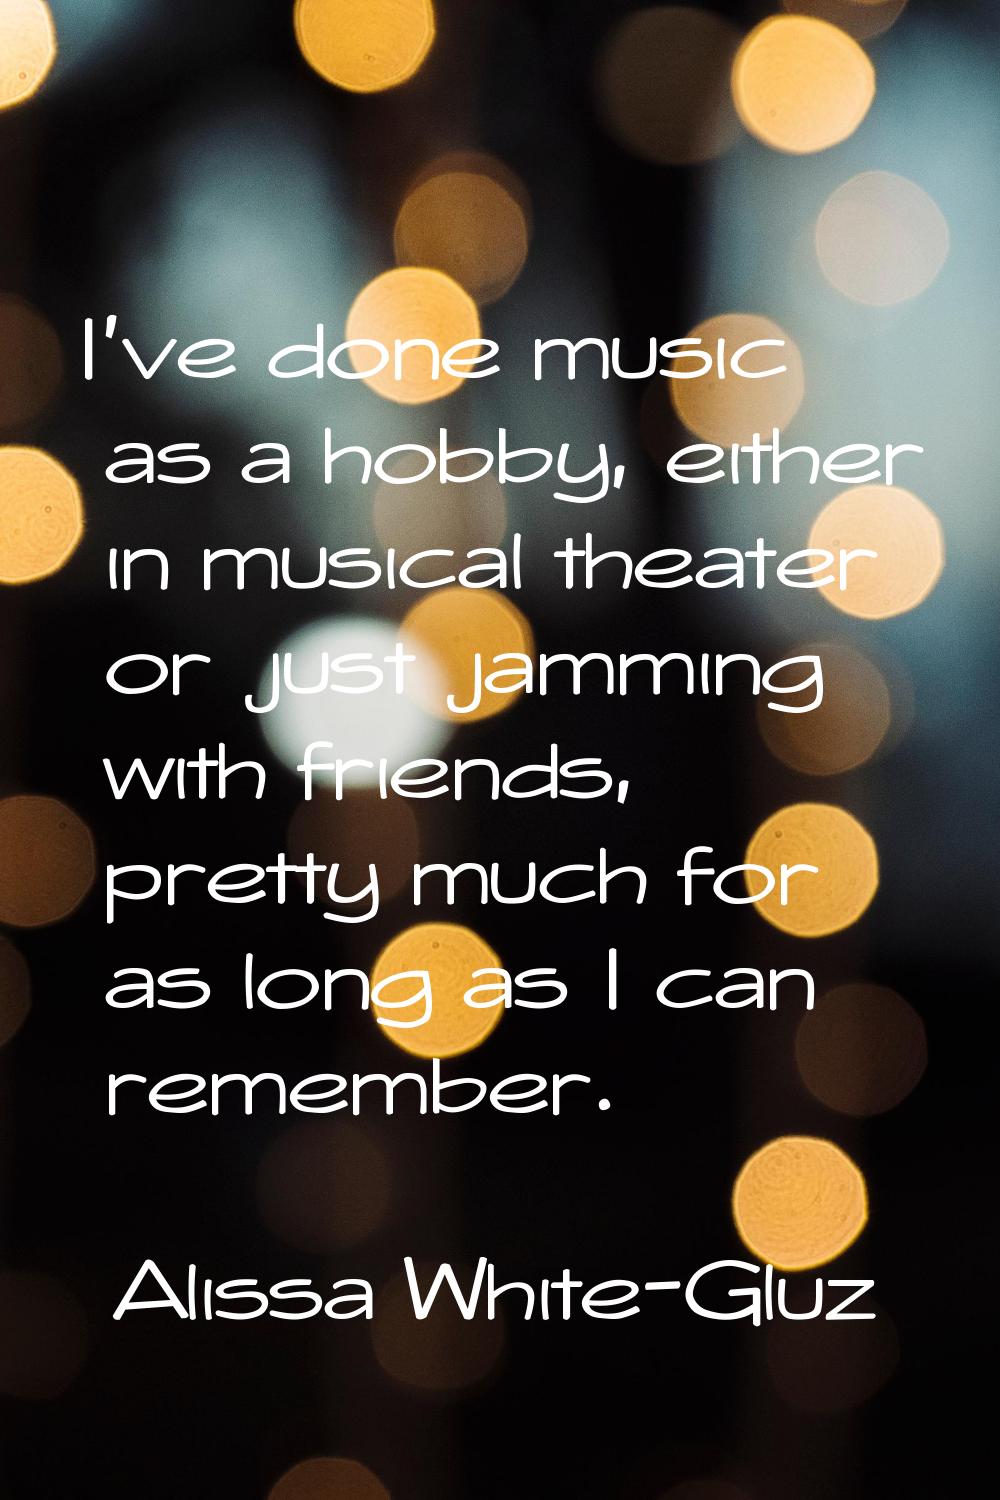 I've done music as a hobby, either in musical theater or just jamming with friends, pretty much for